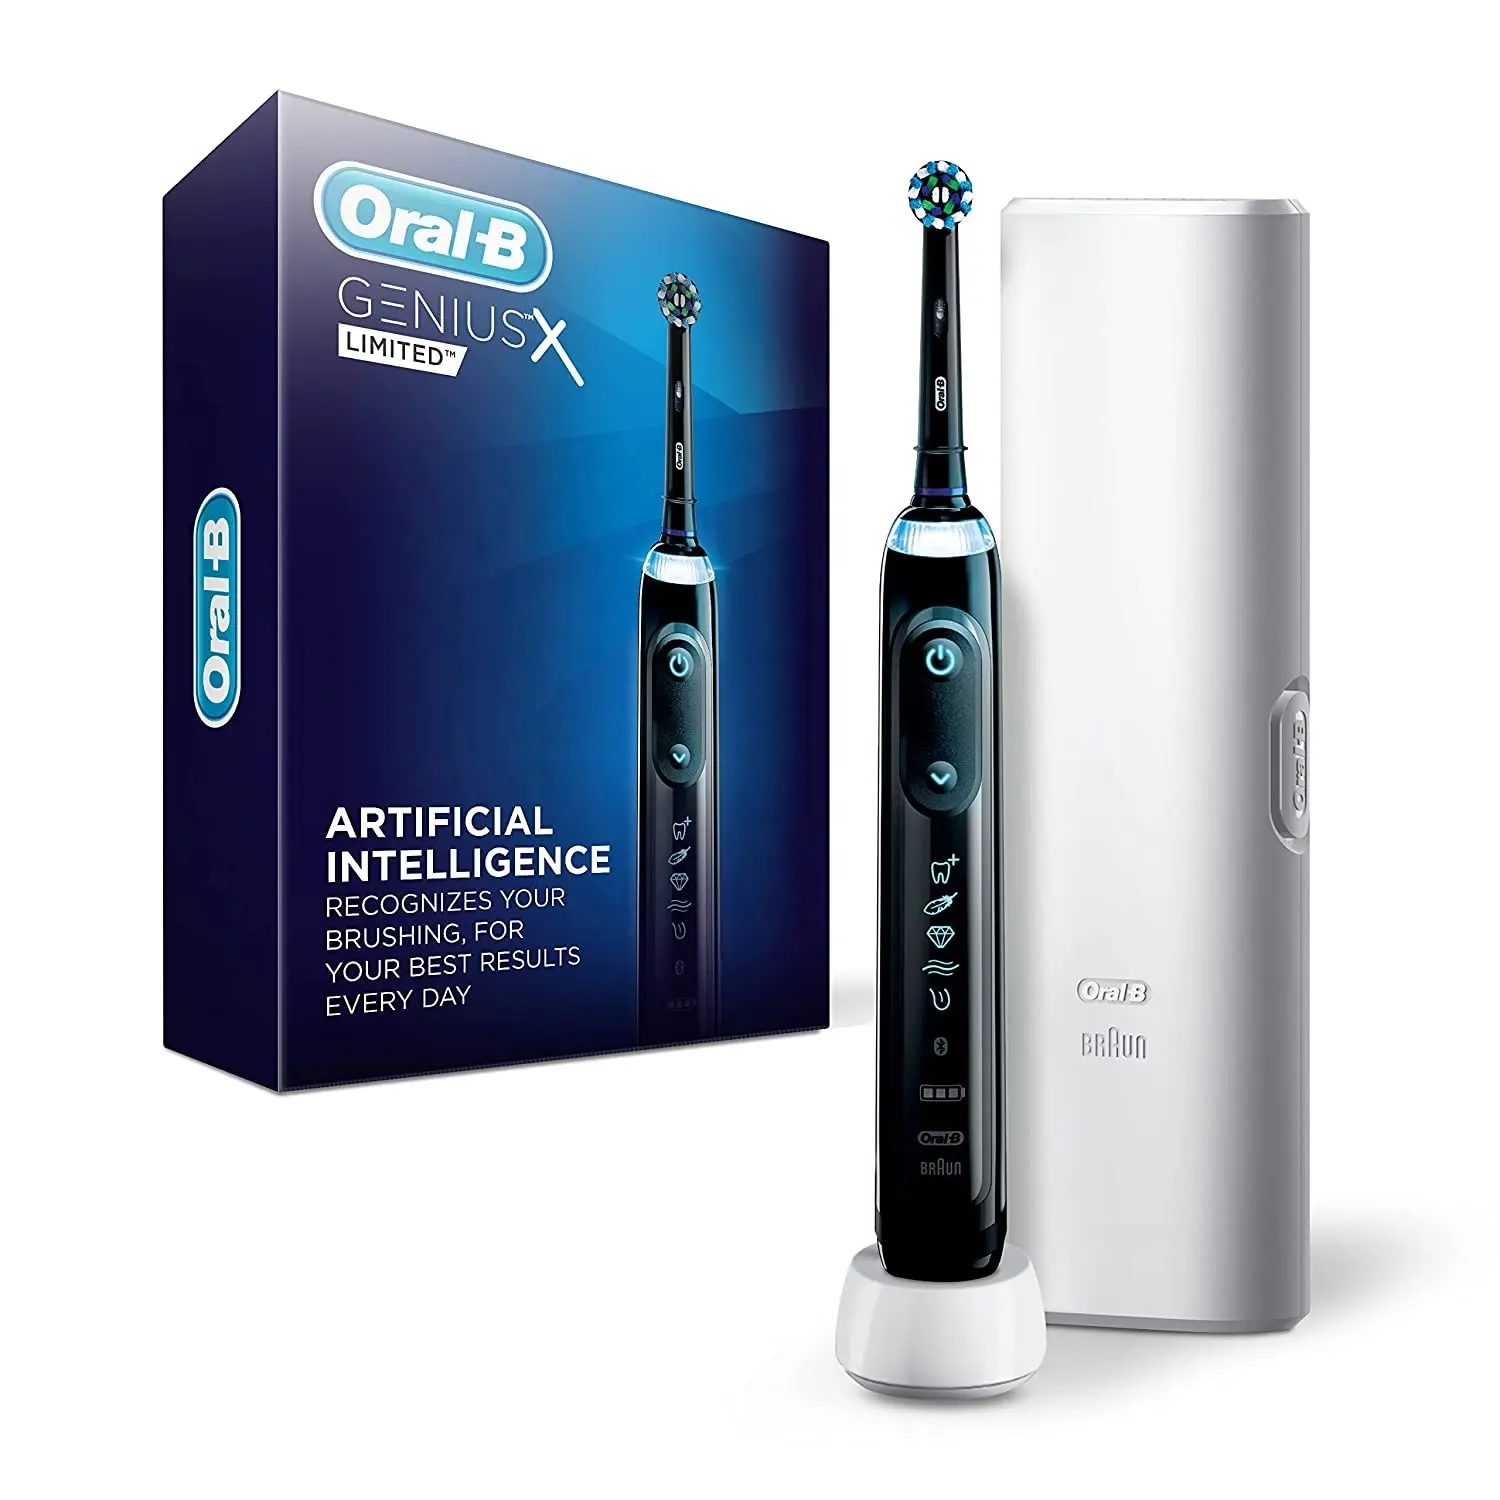 Oral-B Genius X Limited, Electric Toothbrush with Artificial Intelligence, 1 Replacement Brush Head, 1 Travel Case, Black